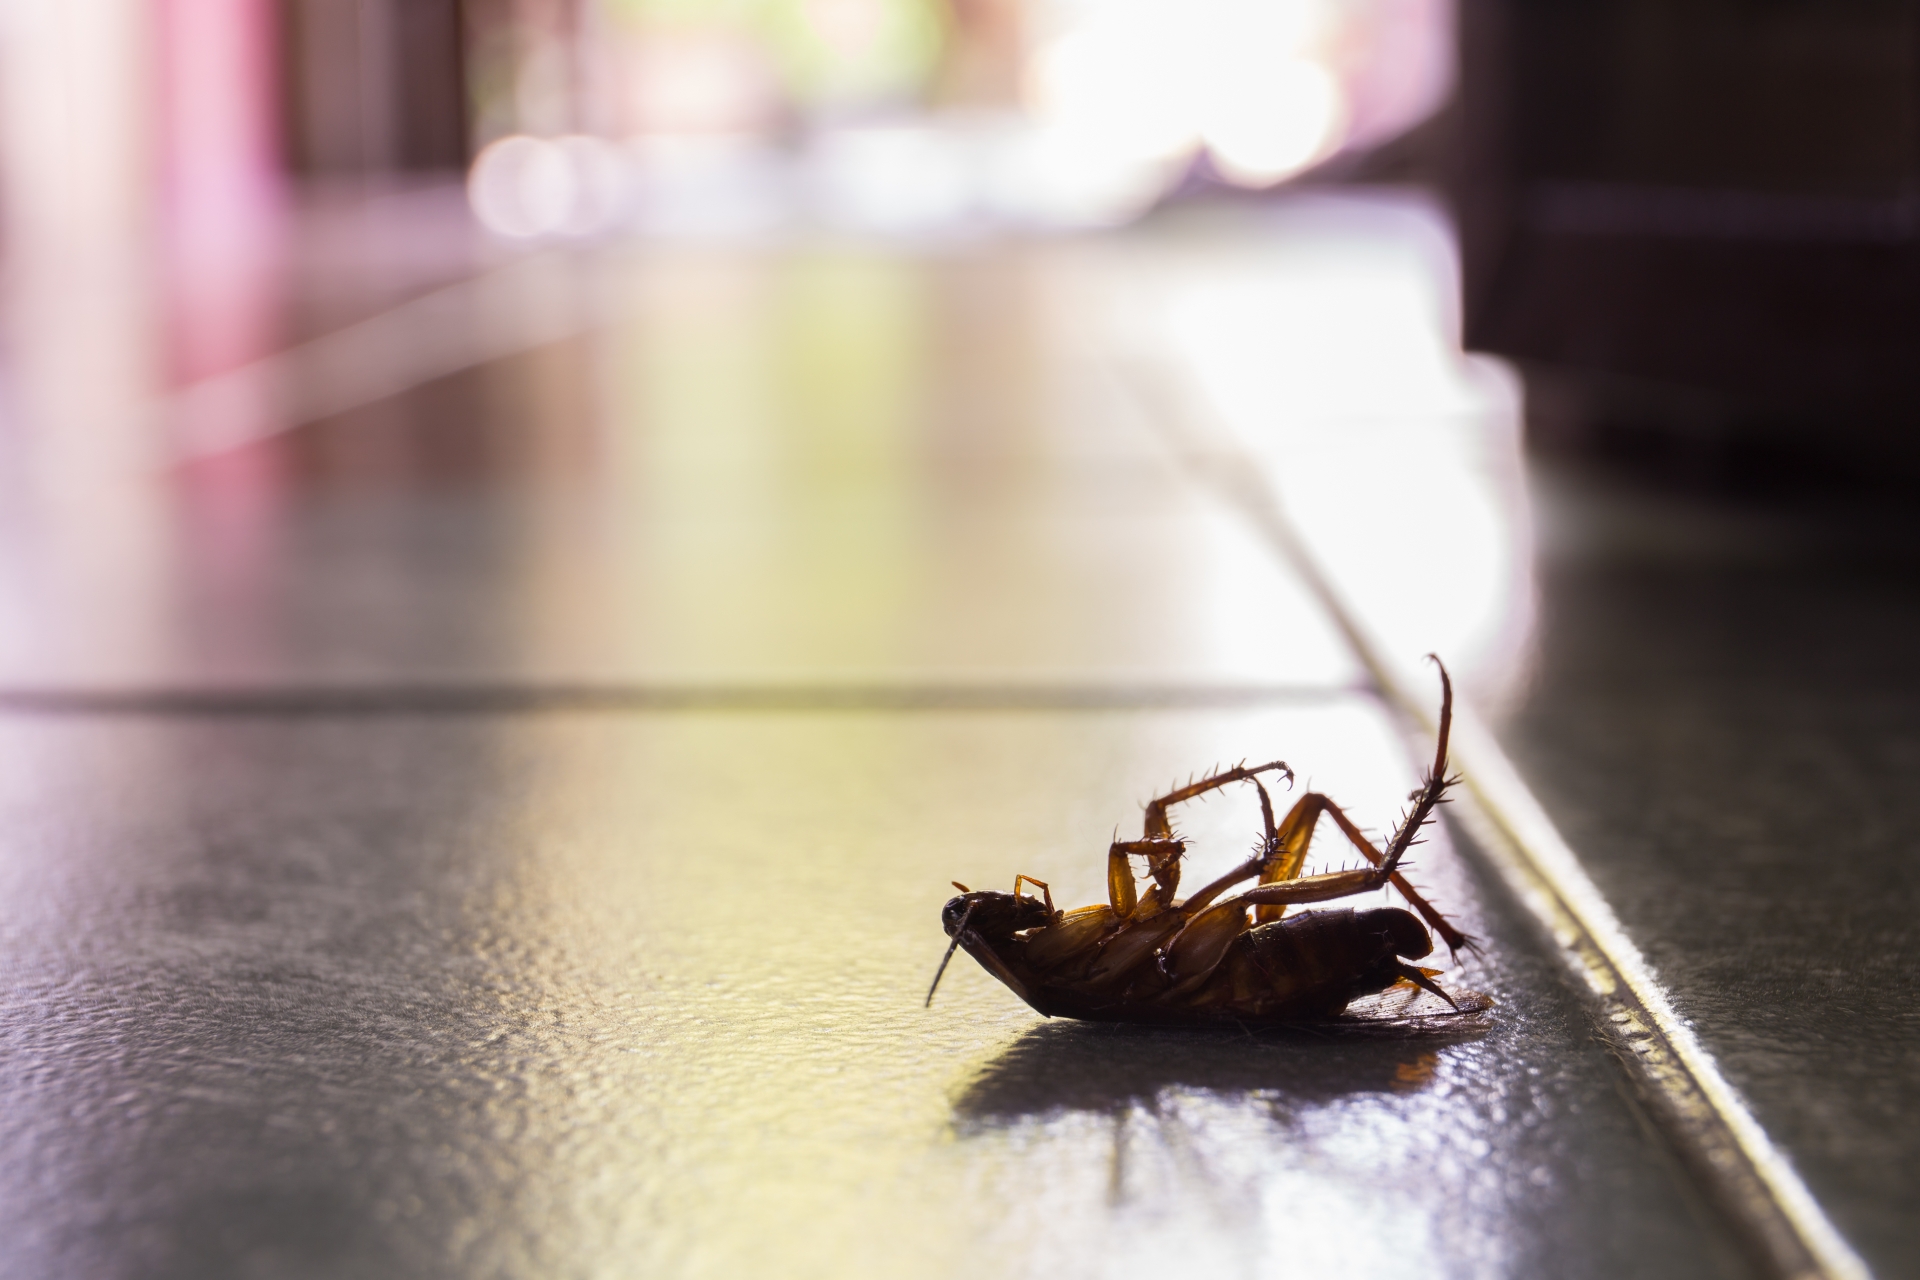 Cockroach Control, Pest Control in Swiss Cottage, NW3. Call Now 020 8166 9746